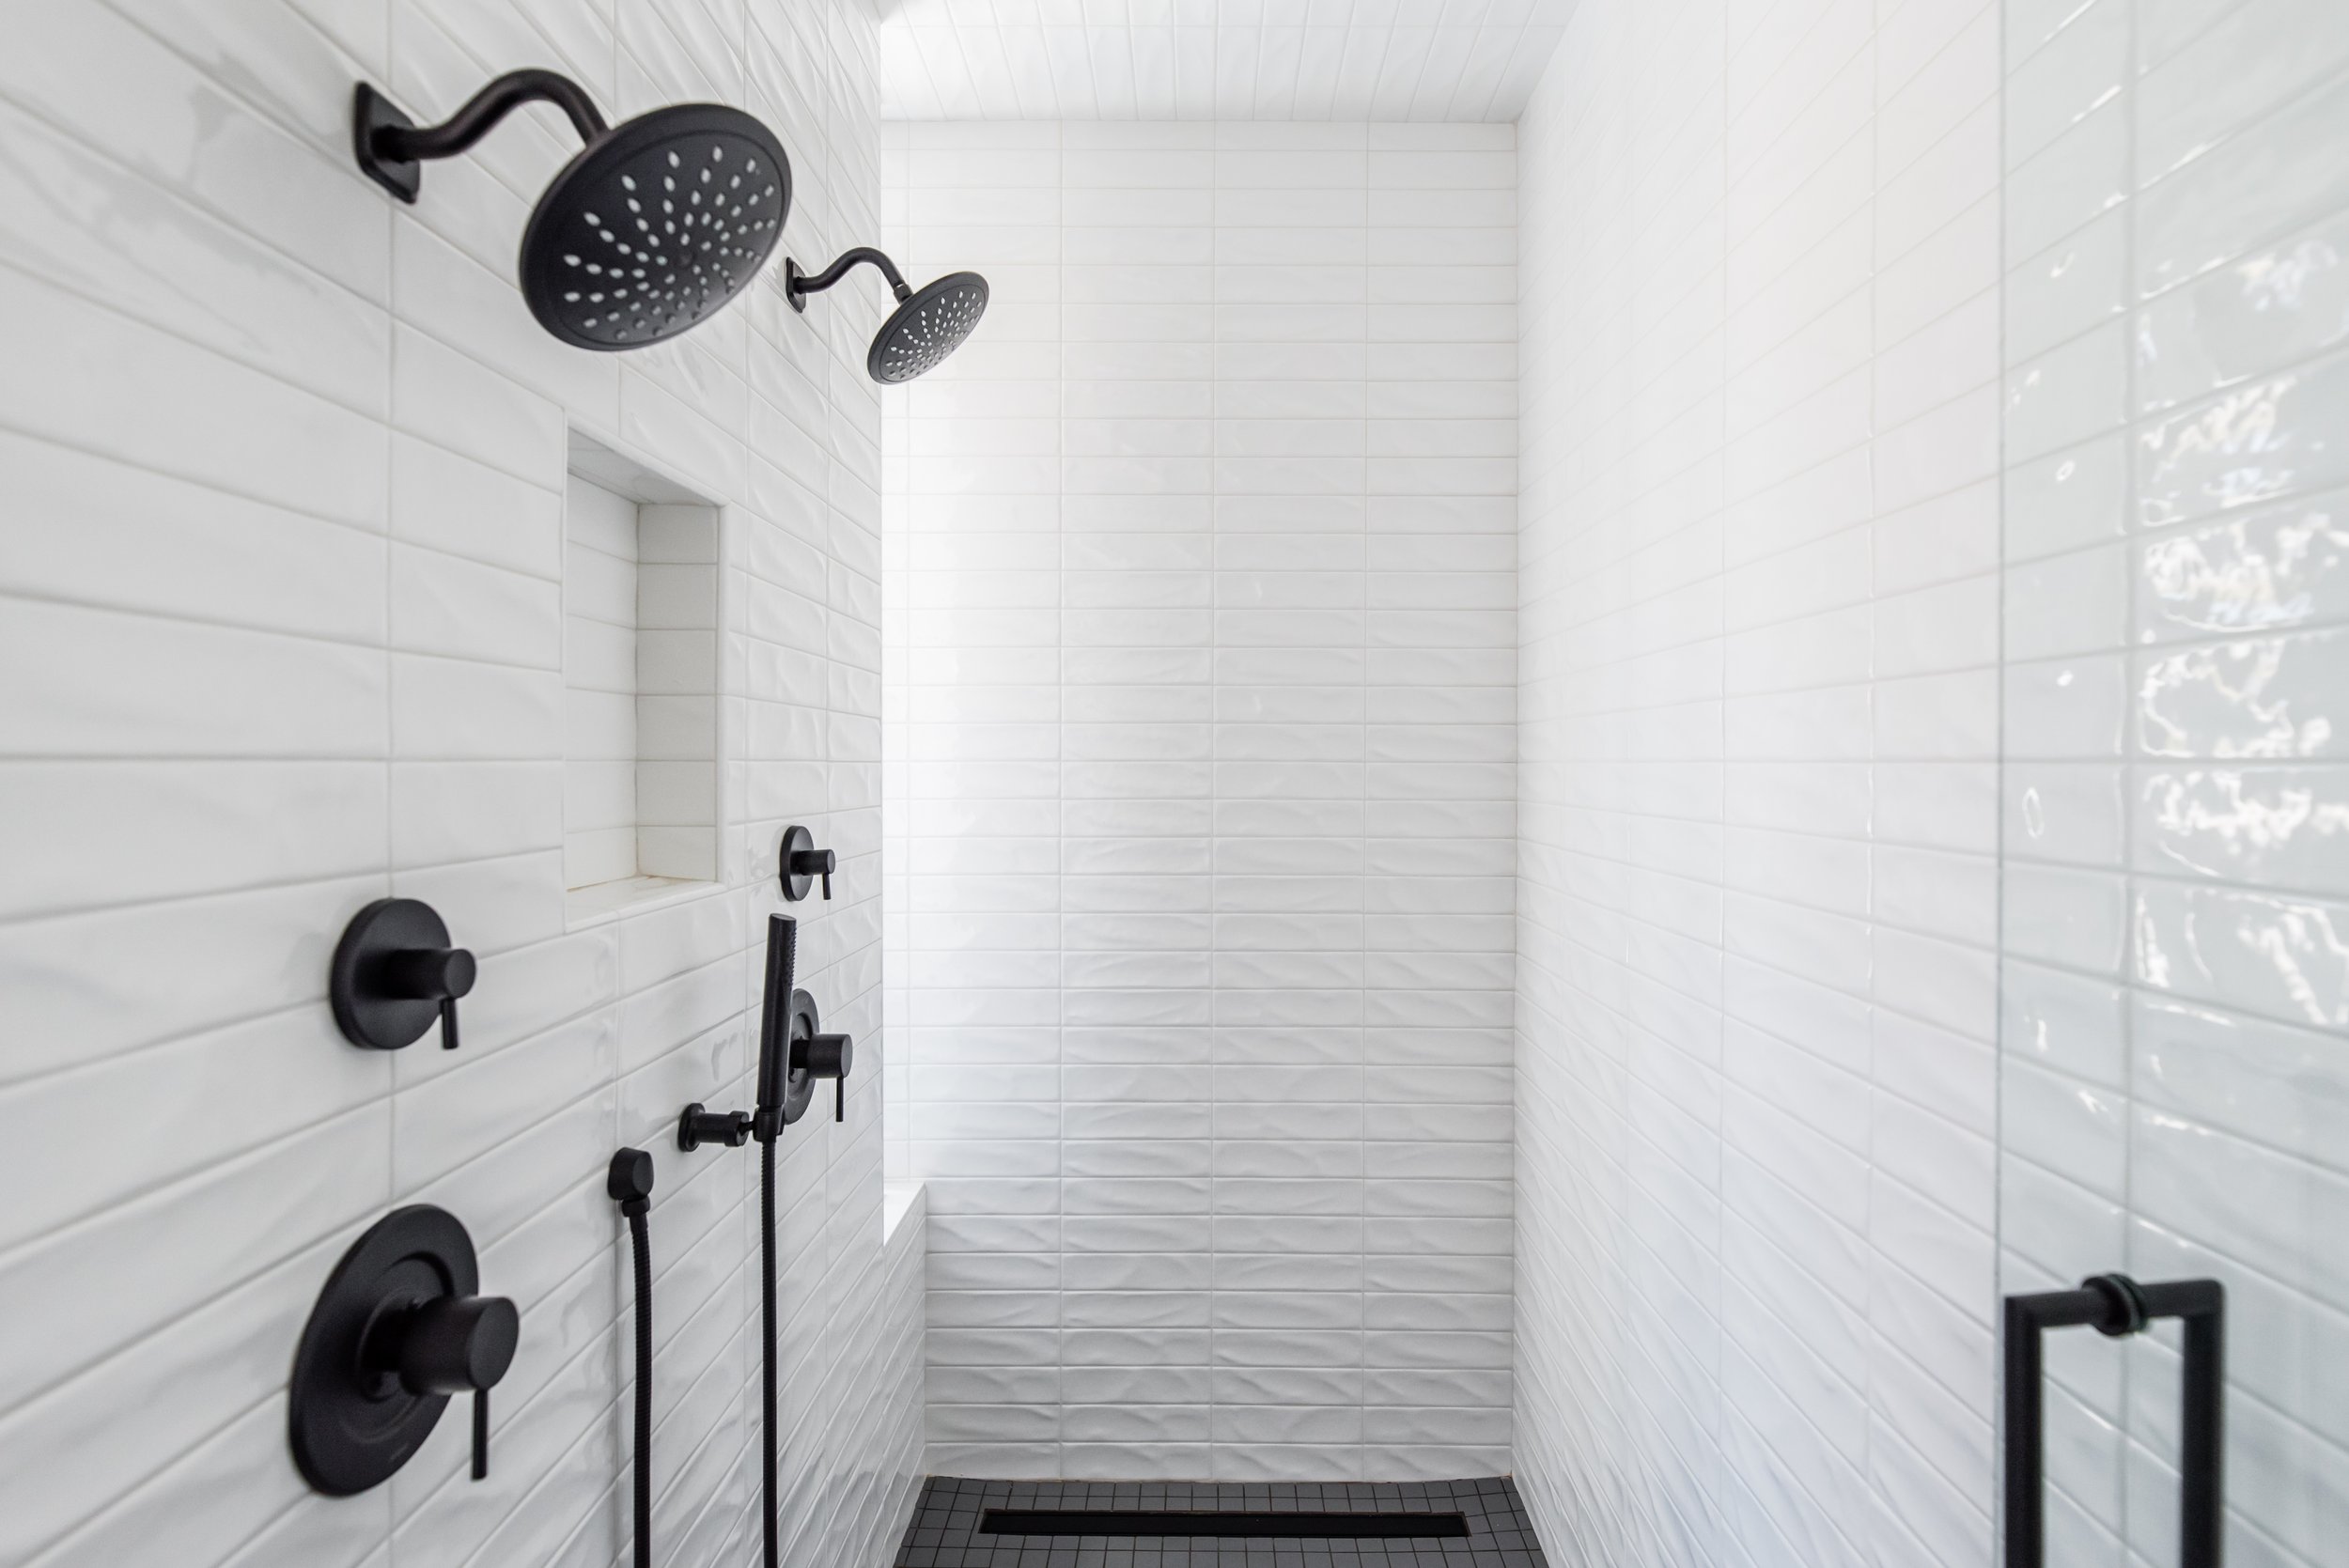  The pros and cons of glass tile in your master bathroom shower by Liz Powell Design. master bathroom two showerheads white and black bathroom #LizPowellDesign #InteriorDesignUtah #InteriorDesigner #buildingahome #tile #backsplash #dreamhome #interio